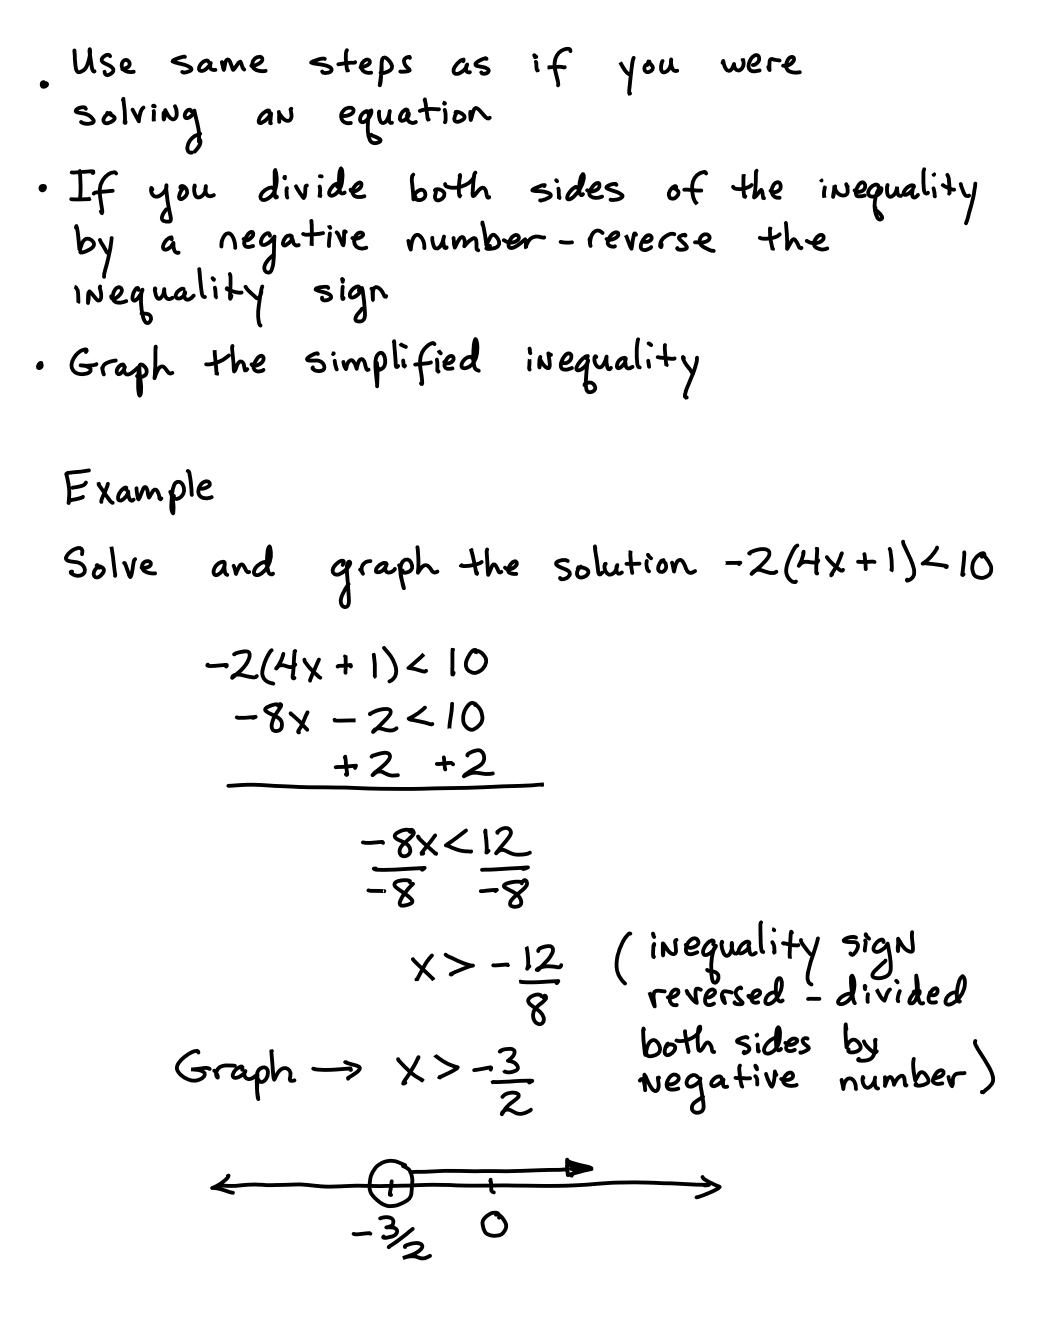 Solving Linear Equations and Inequalities Image